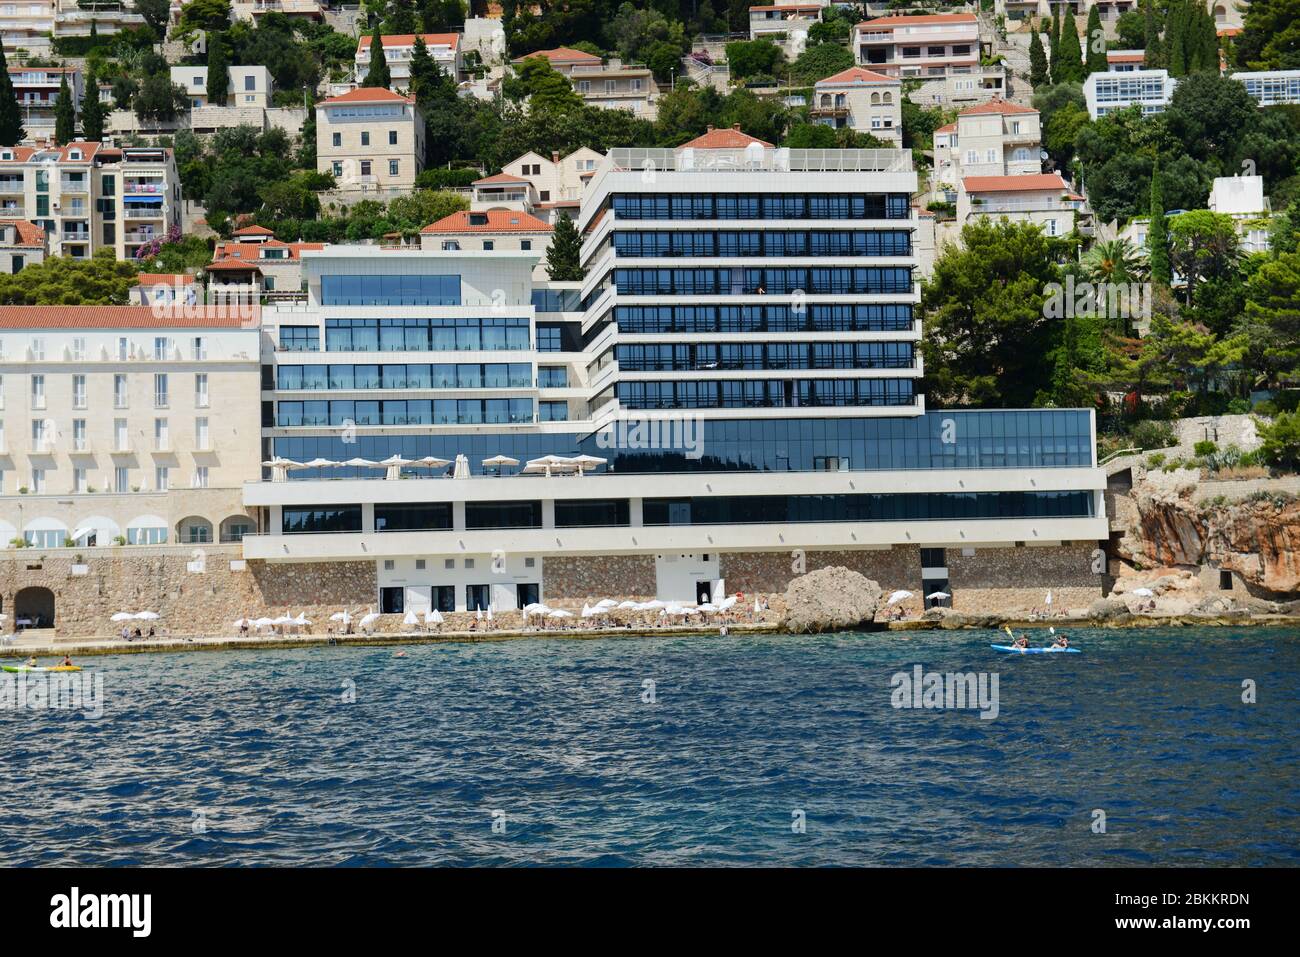 Hotel Excelsior in Dubrovnik. Old & new buildings combined together. Stock Photo